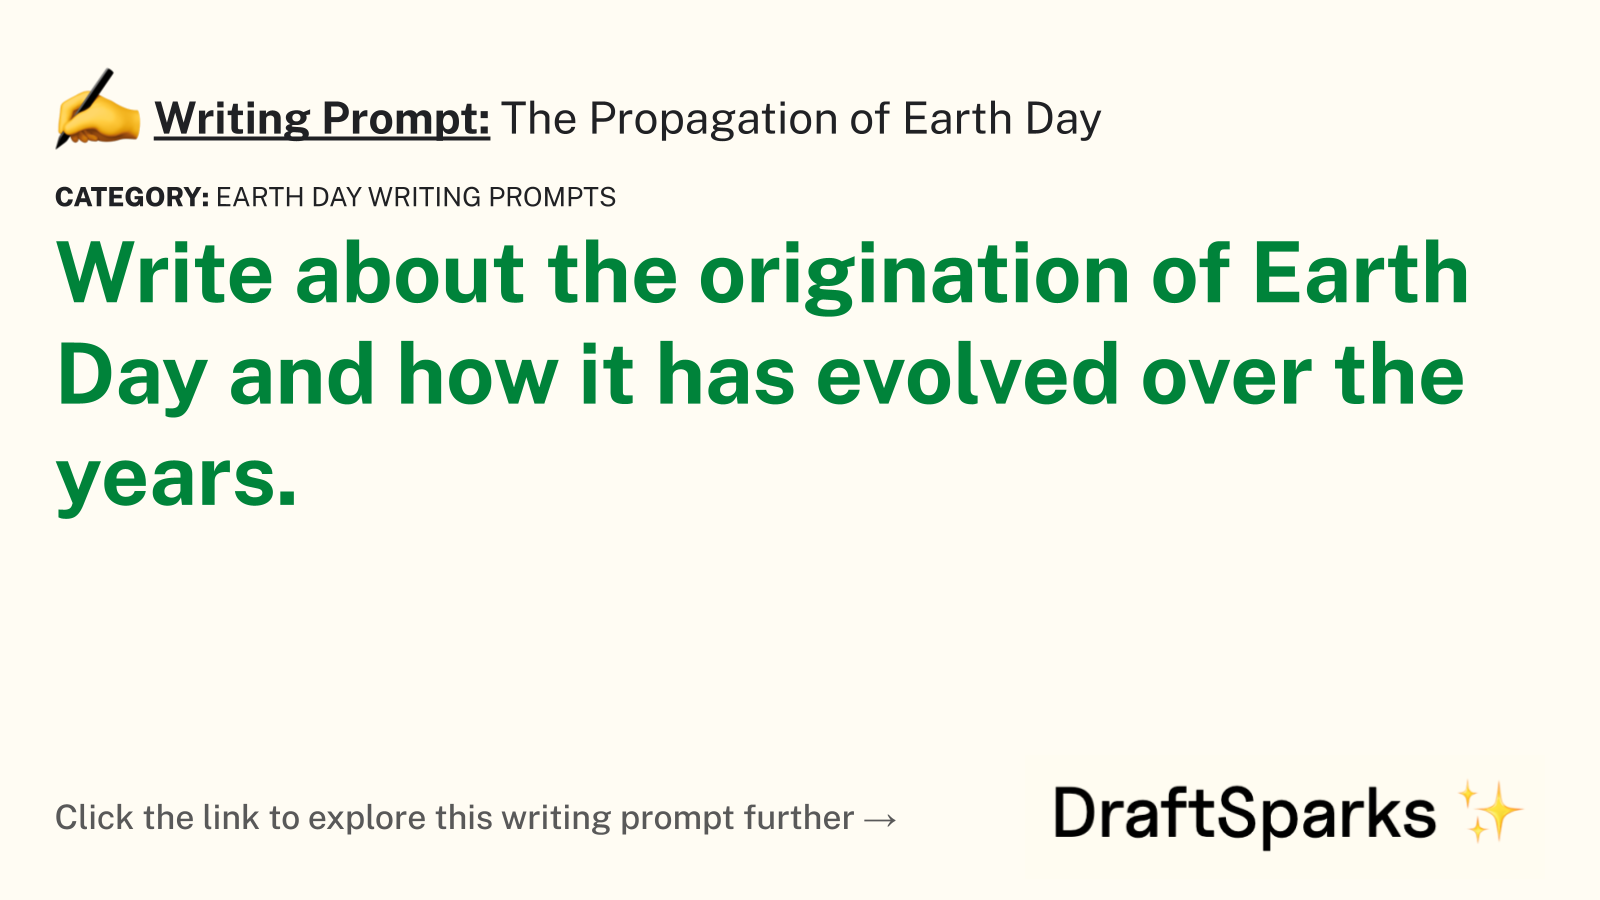 The Propagation of Earth Day